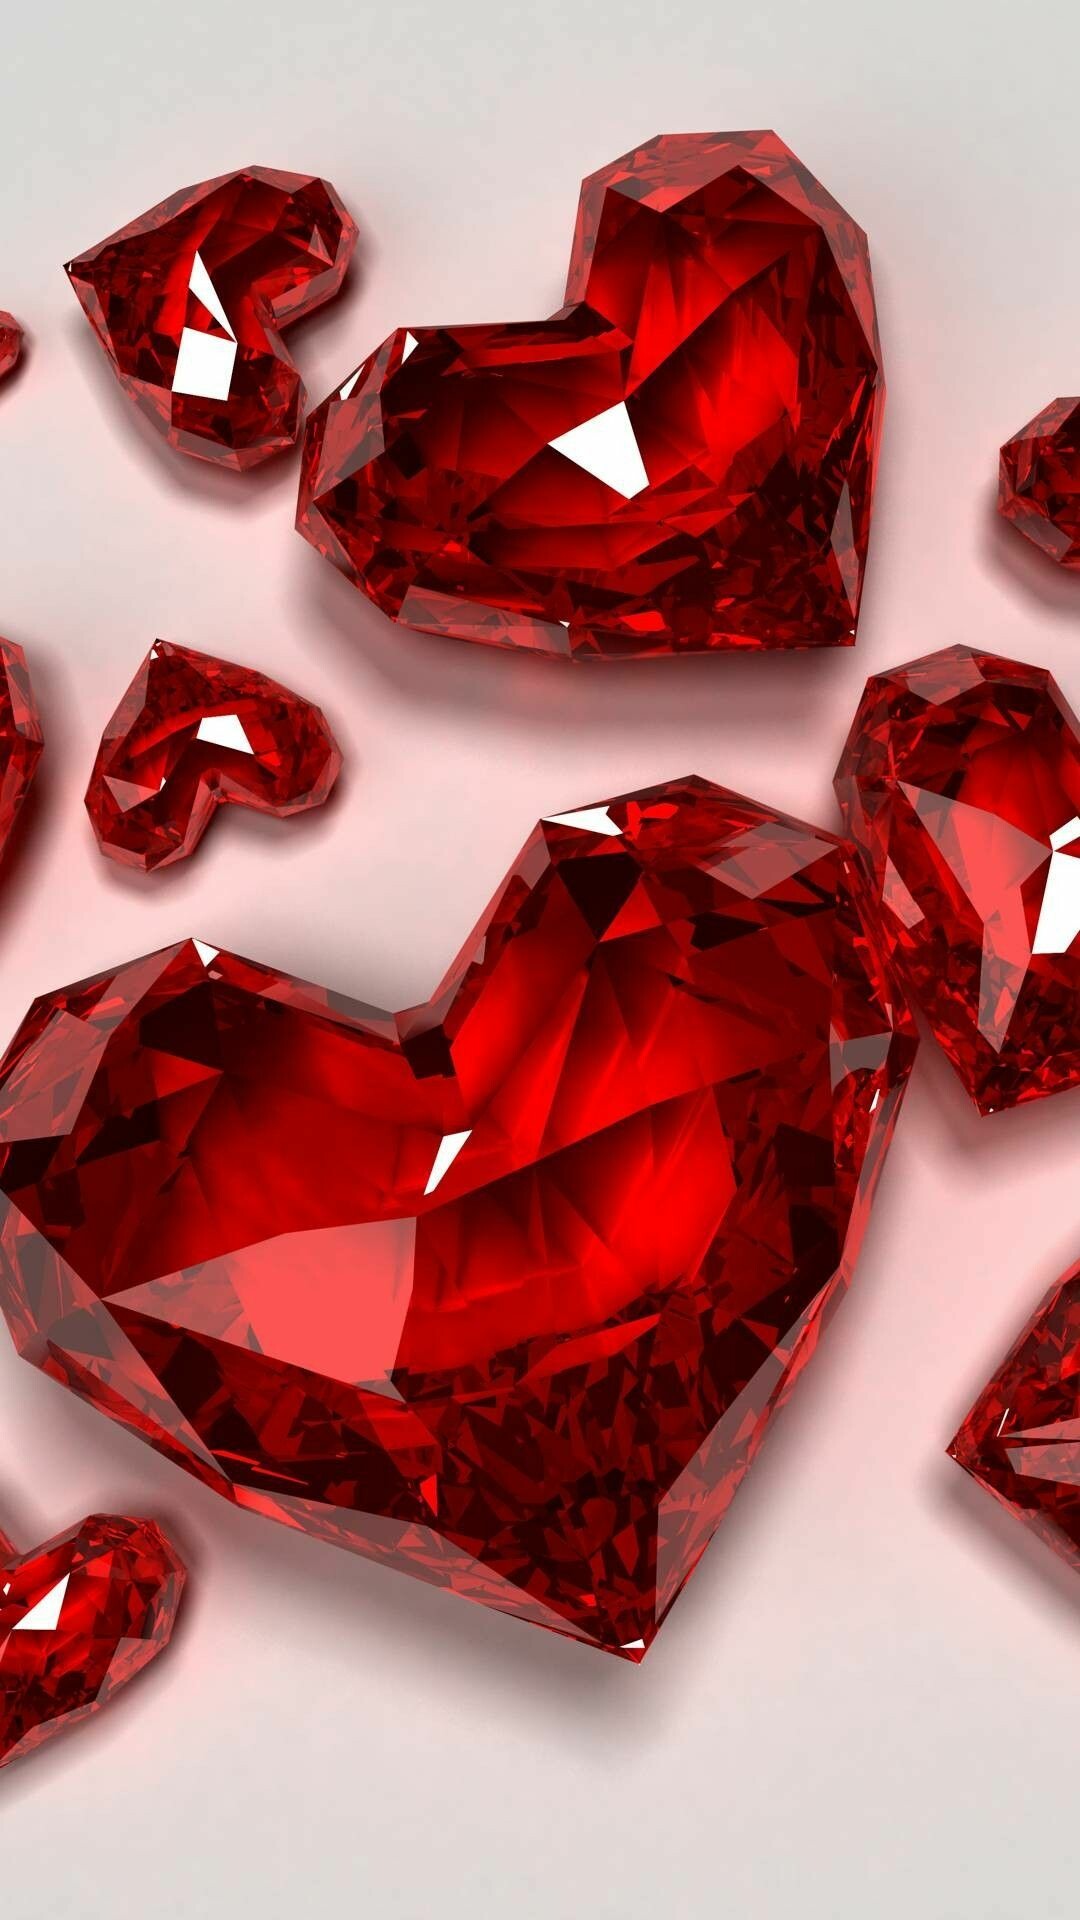 Jewels: Ruby, A pinkish red to blood-red colored gemstone, Gemstone. 1080x1920 Full HD Wallpaper.